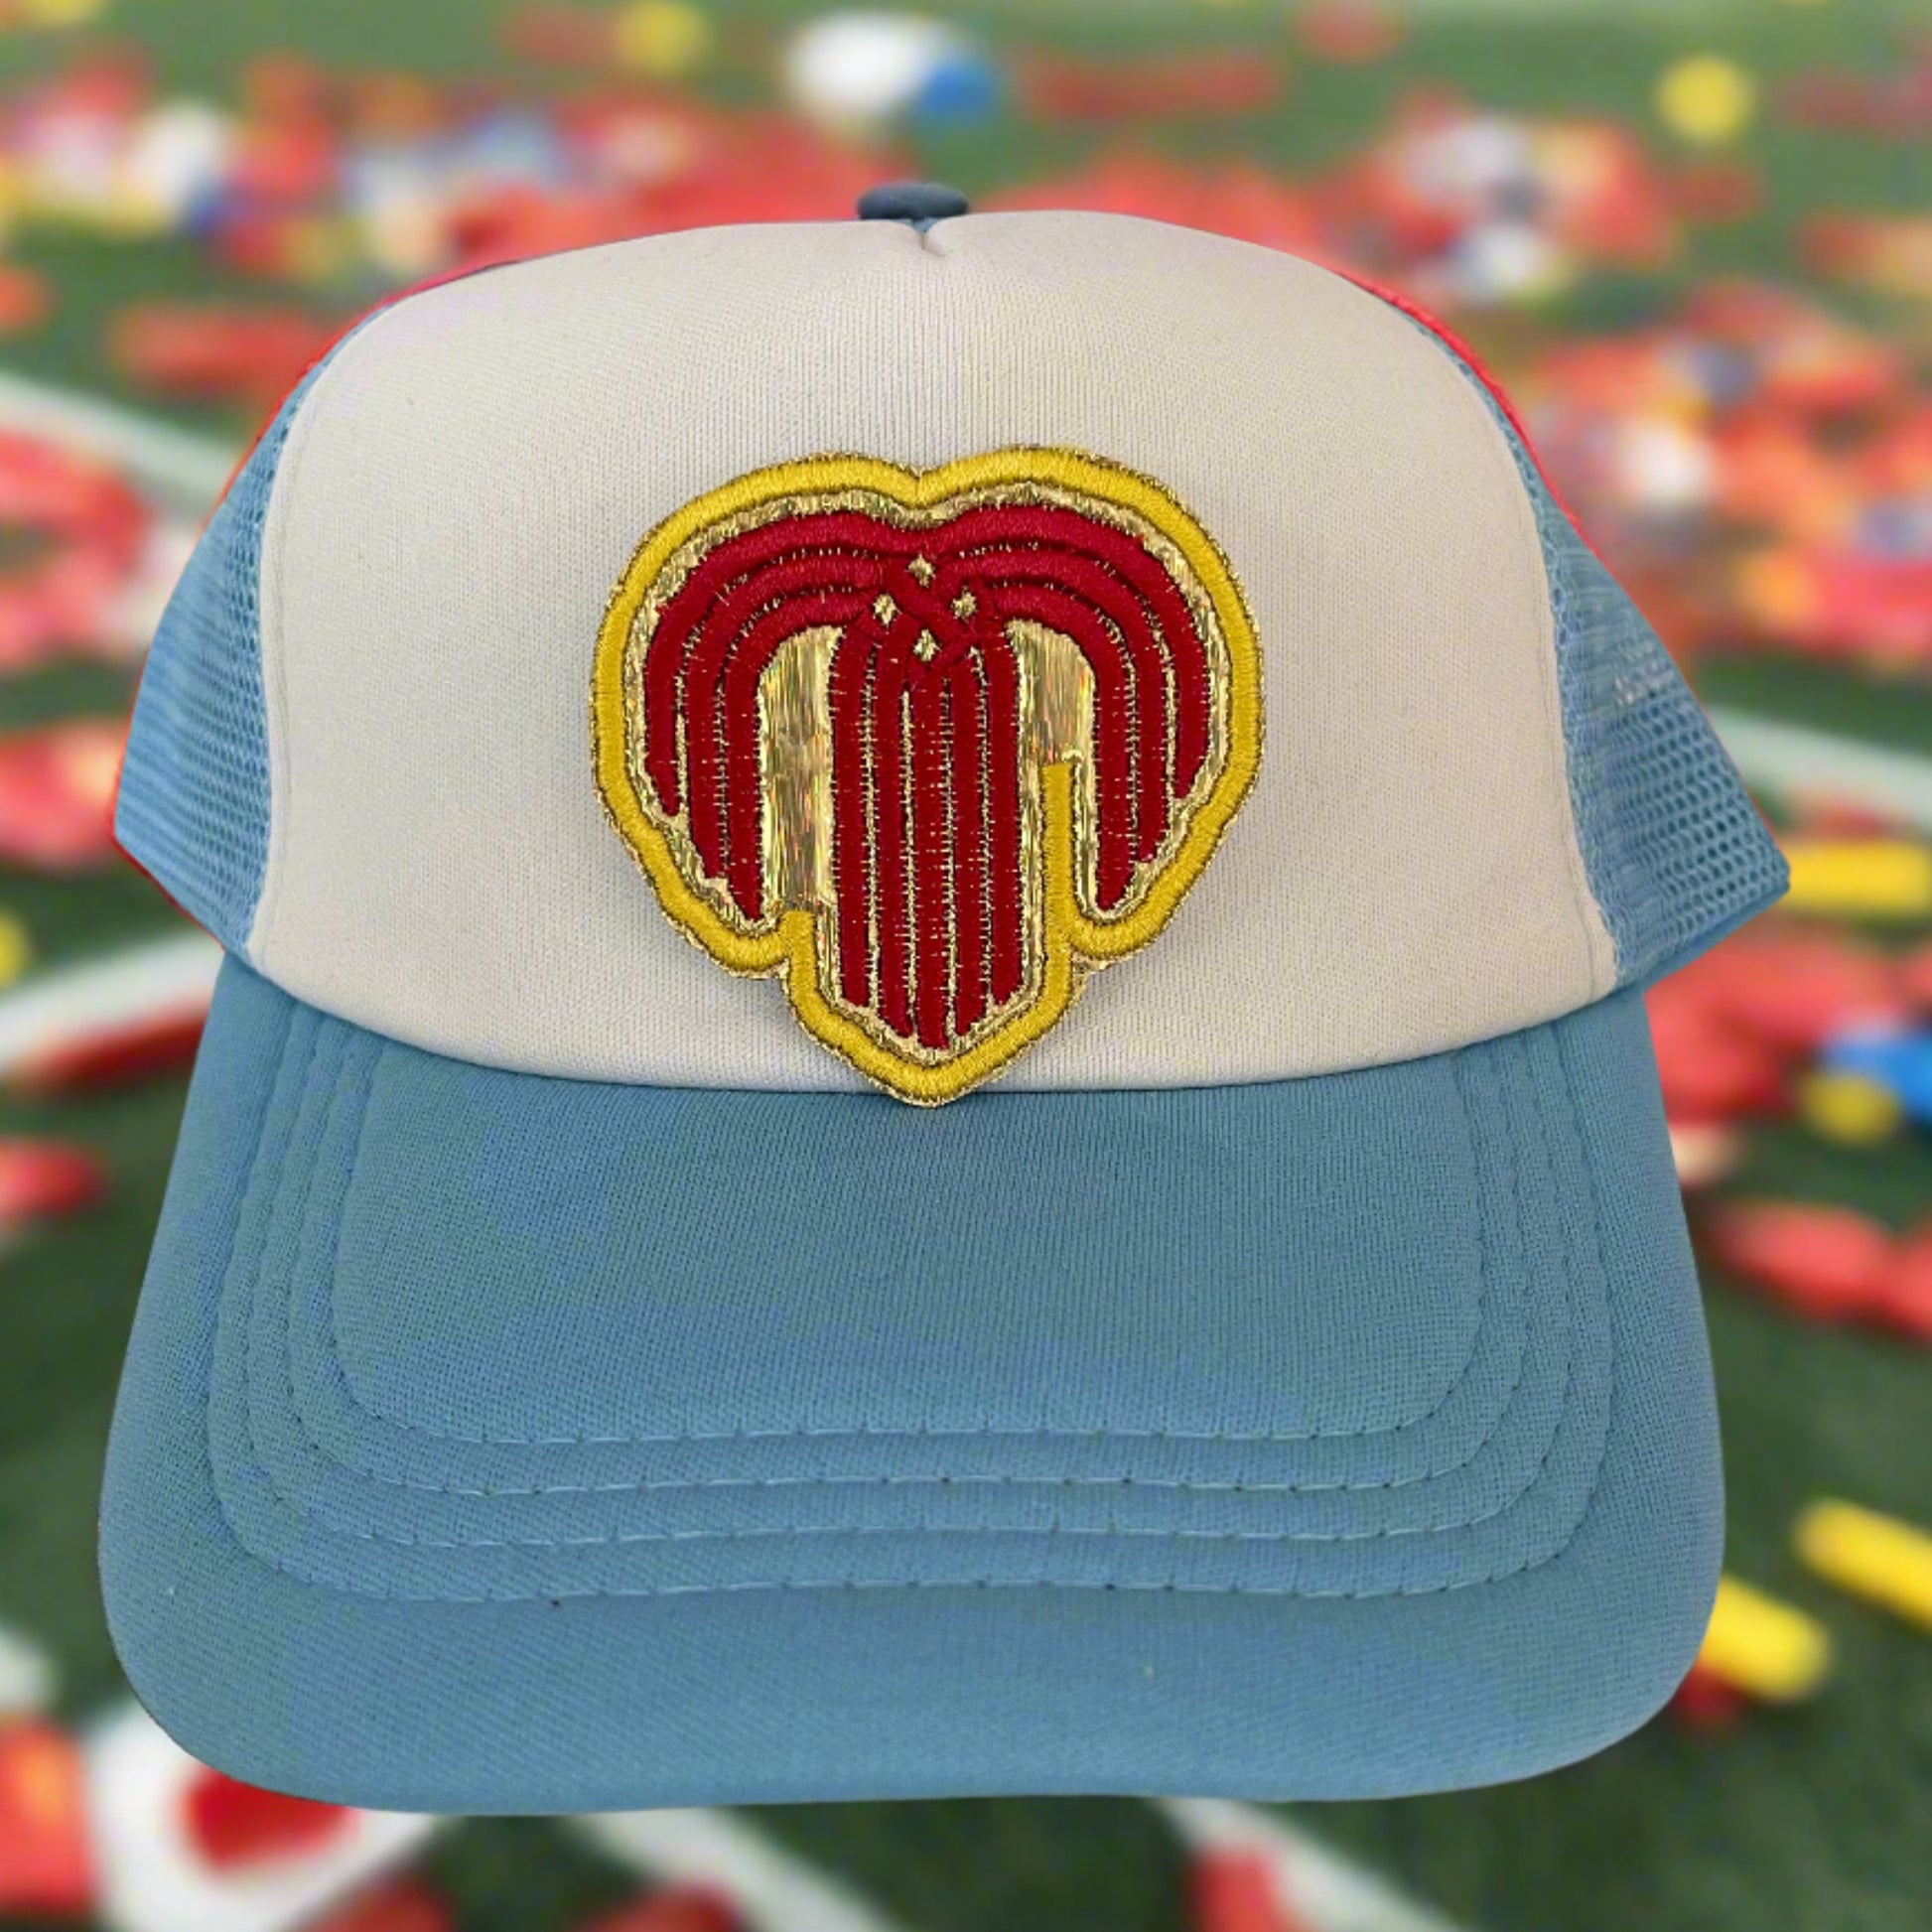 Kansas City Fountain Logo iron-on patch in Chiefs colors, perfect for adding a touch of local pride to any apparel.